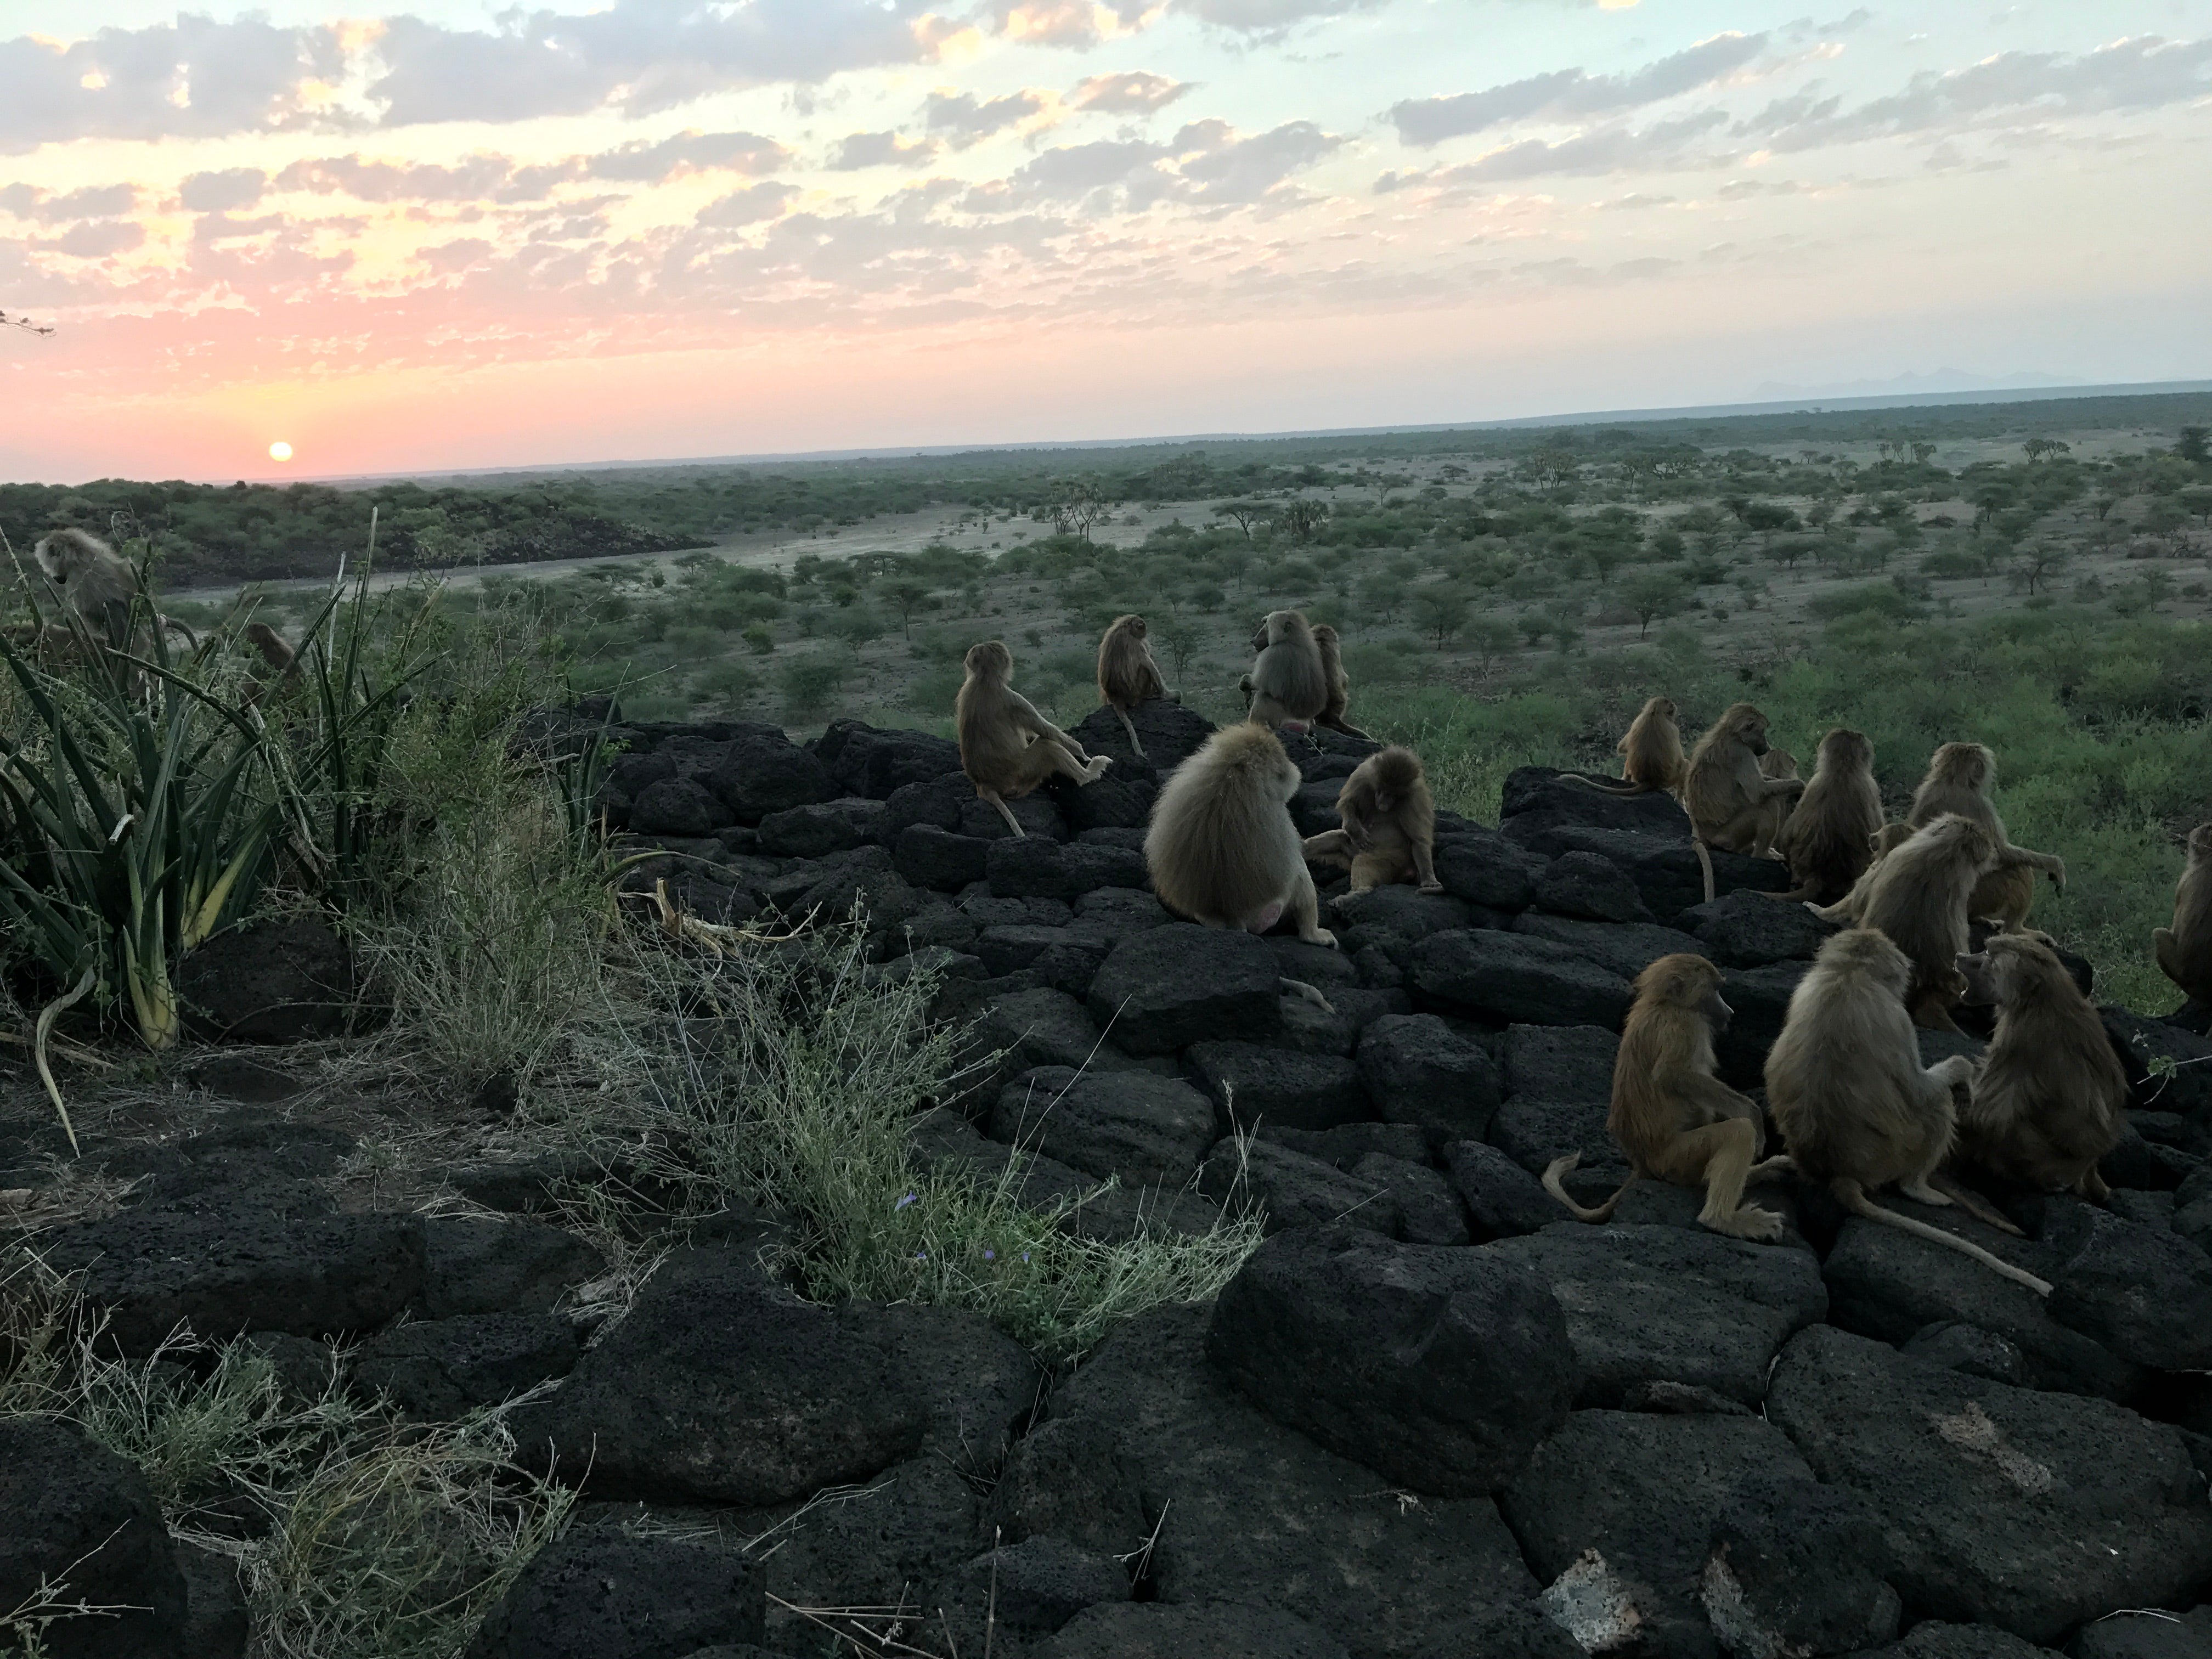 A group of baboons seated on a cluster of rocks in Ethiopia at sunset